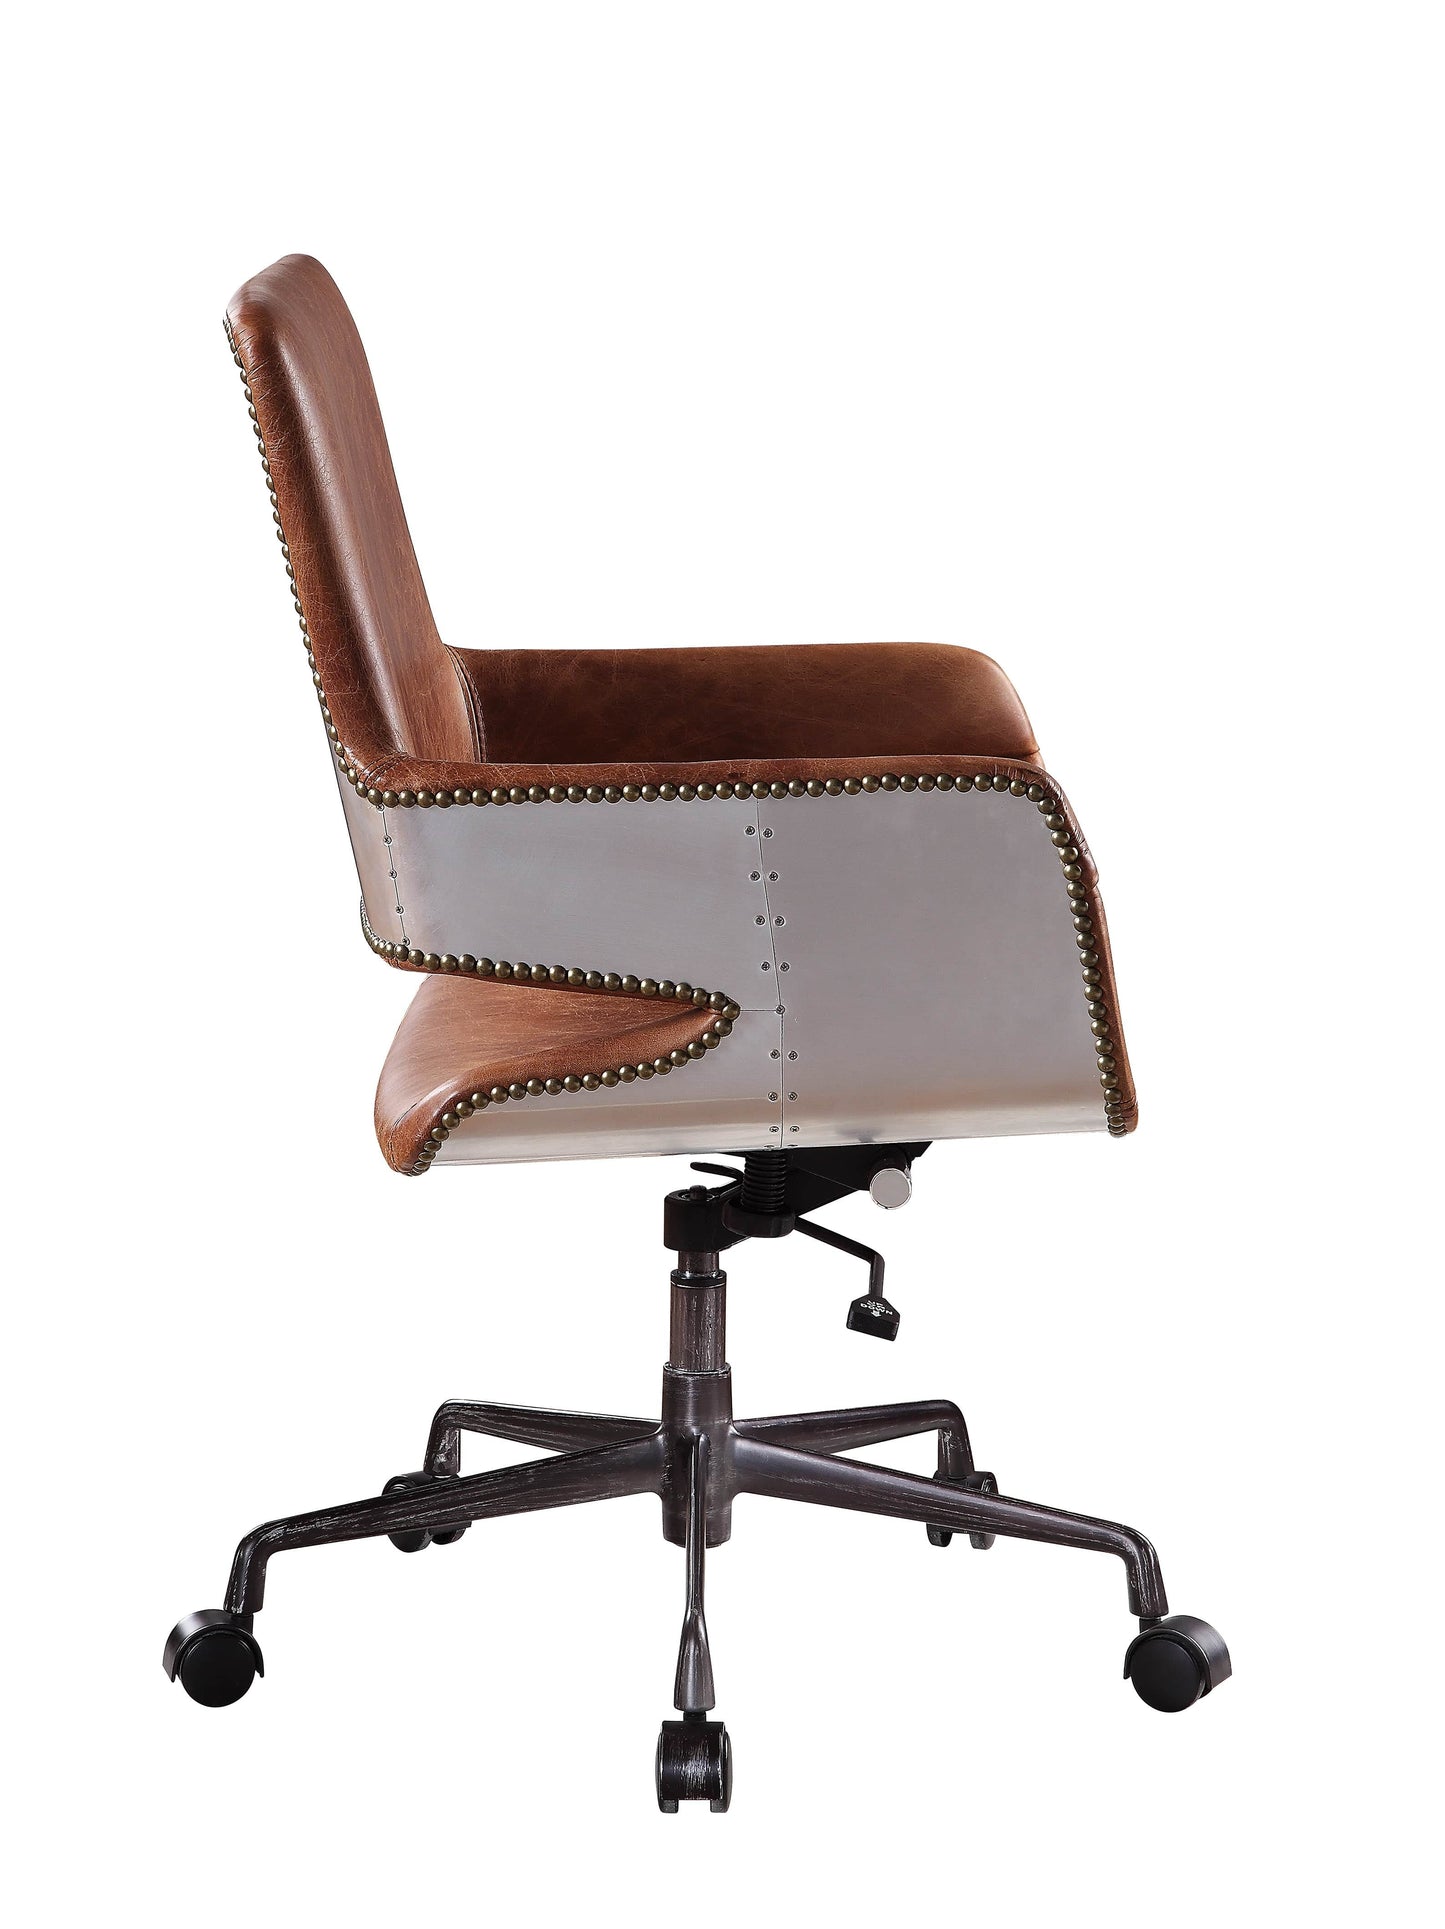 Faux Leather Upholstered Wooden Office Chair With Lift Mechanism,Brown